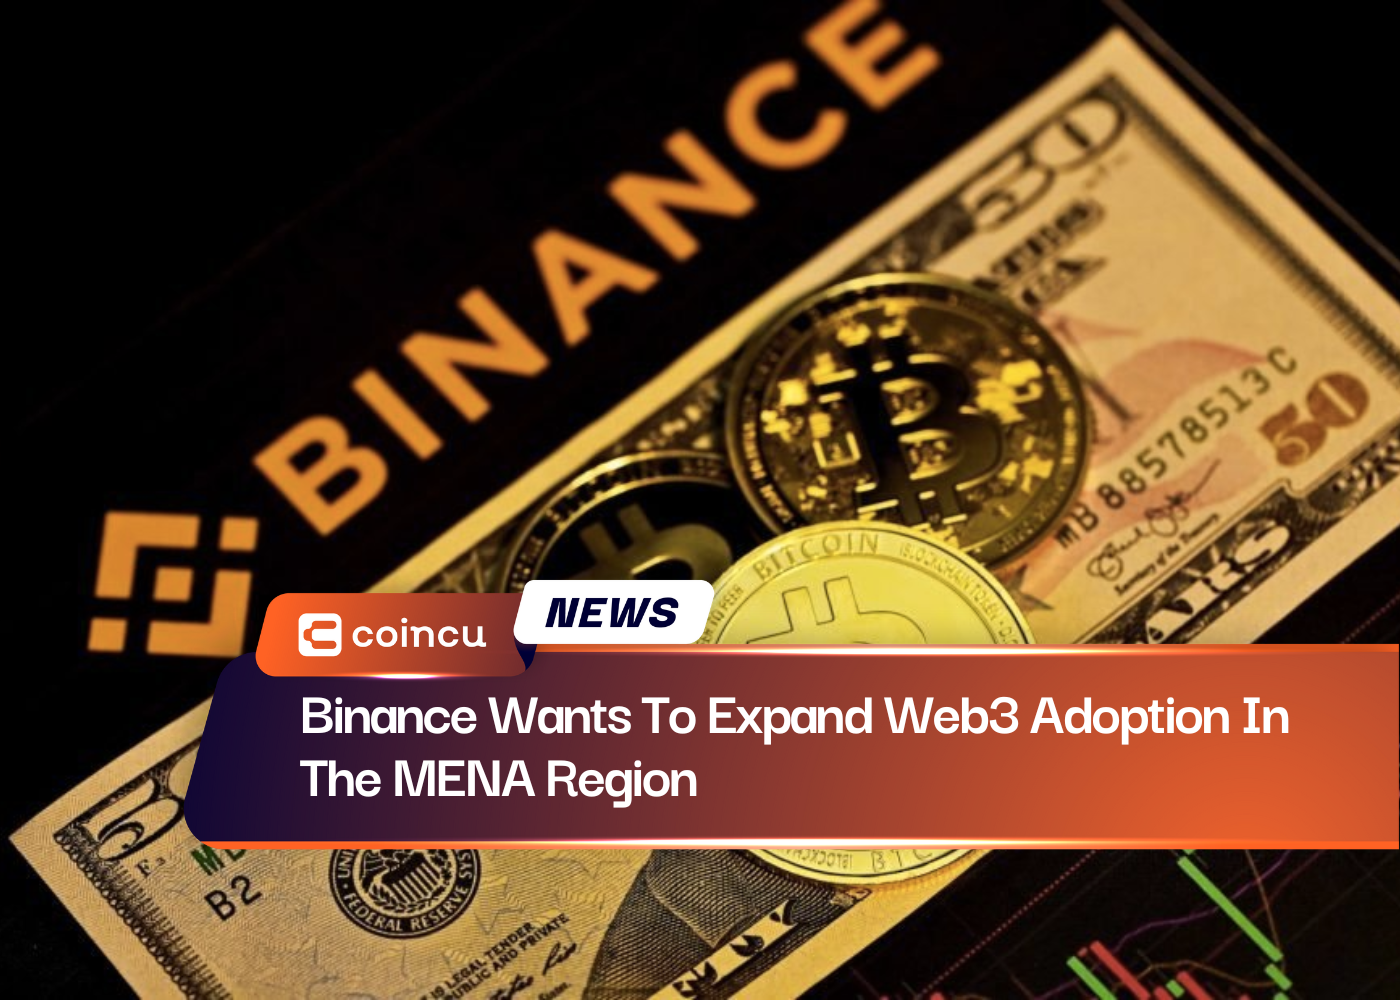 Binance Wants To Expand Web3 Adoption In The MENA Region